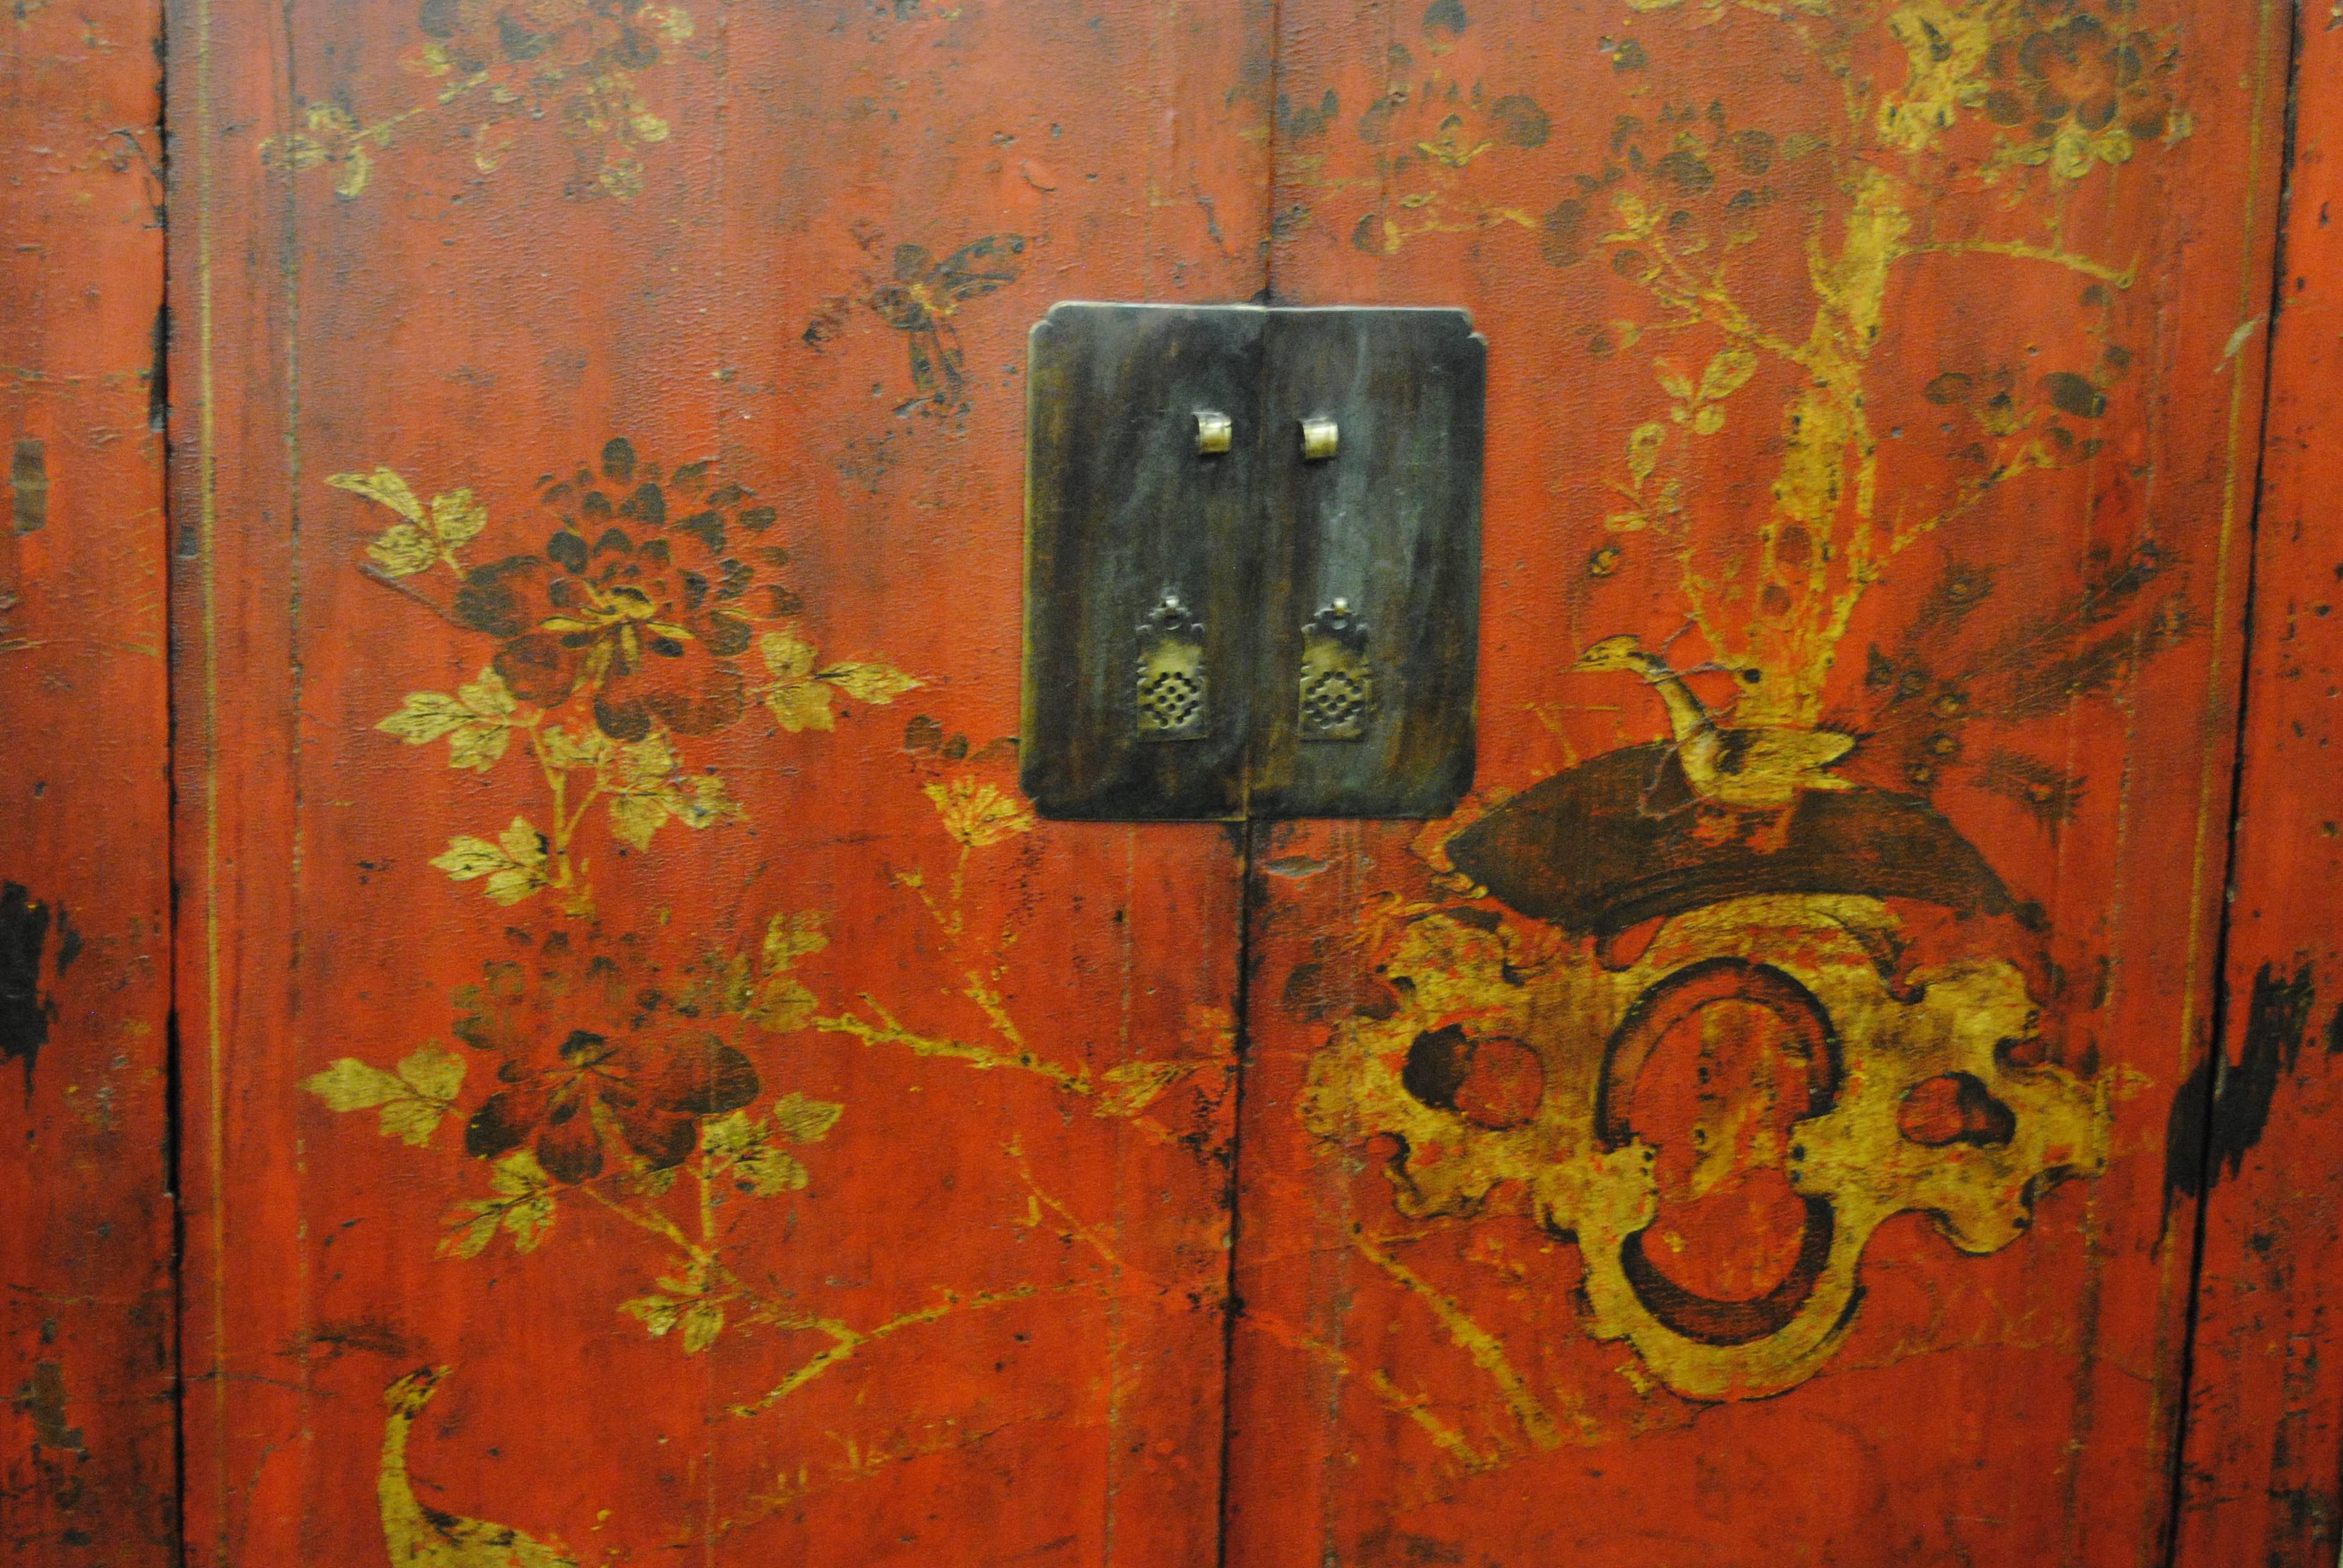 Late 19th century Chinese two-door wedding armoire from Shanxi province.  The Asian cabinet has original painted design and lacquer. Two inner shelves and a lower storage area in the bottom of the cabinet.